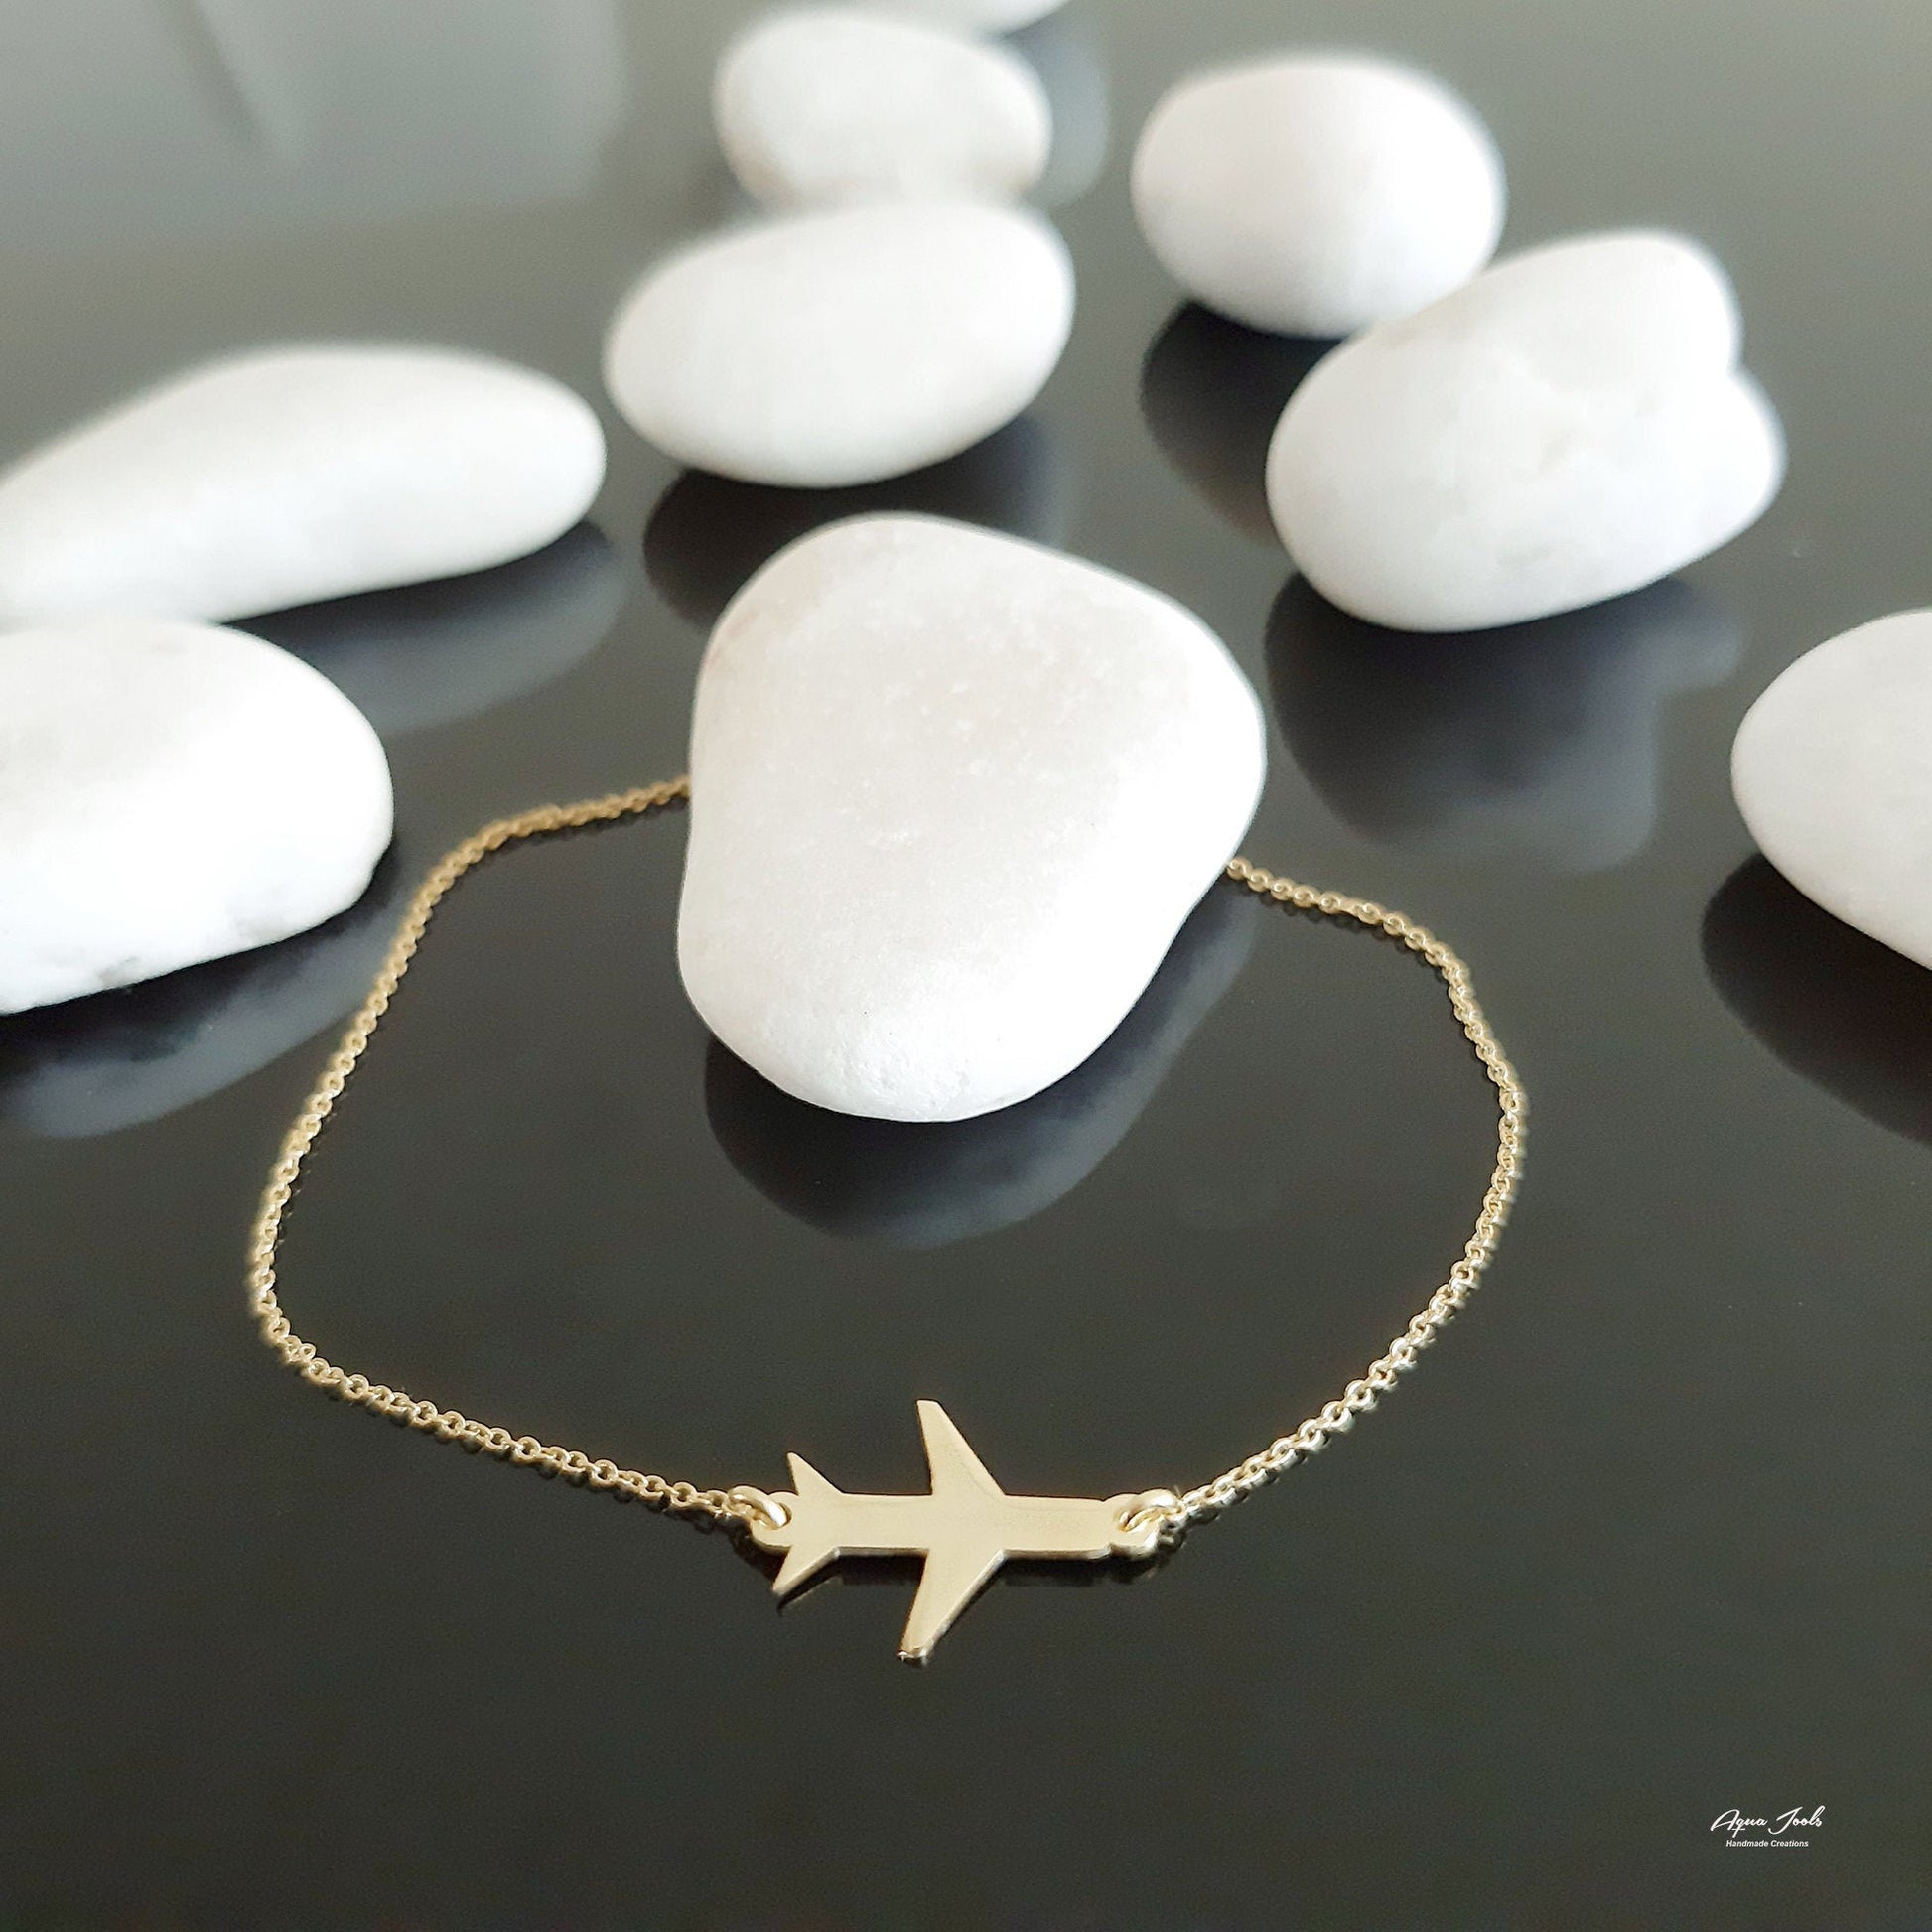 14K Gold Airplane Pendant Necklace